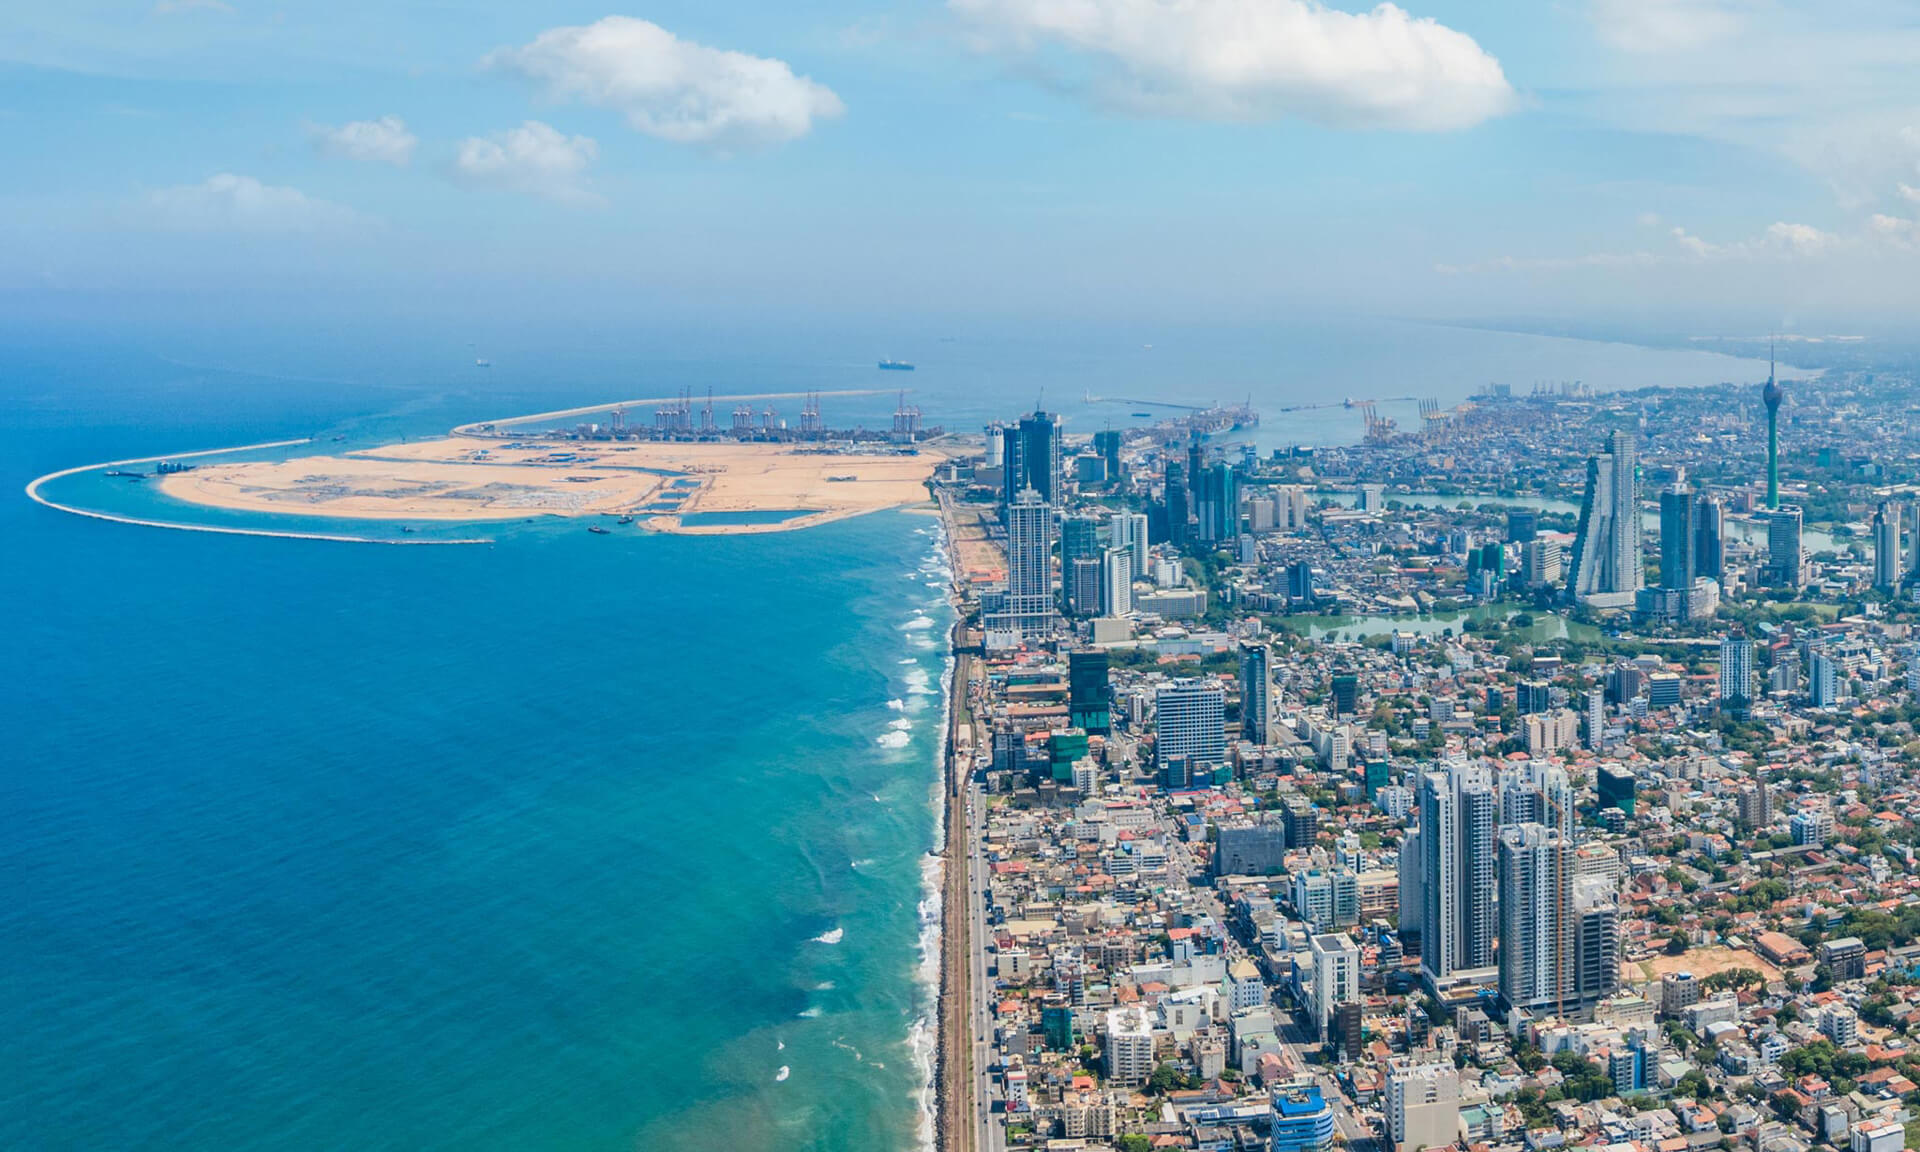 Land For Sale In Colombo: Your Path To Exclusive Real Estate